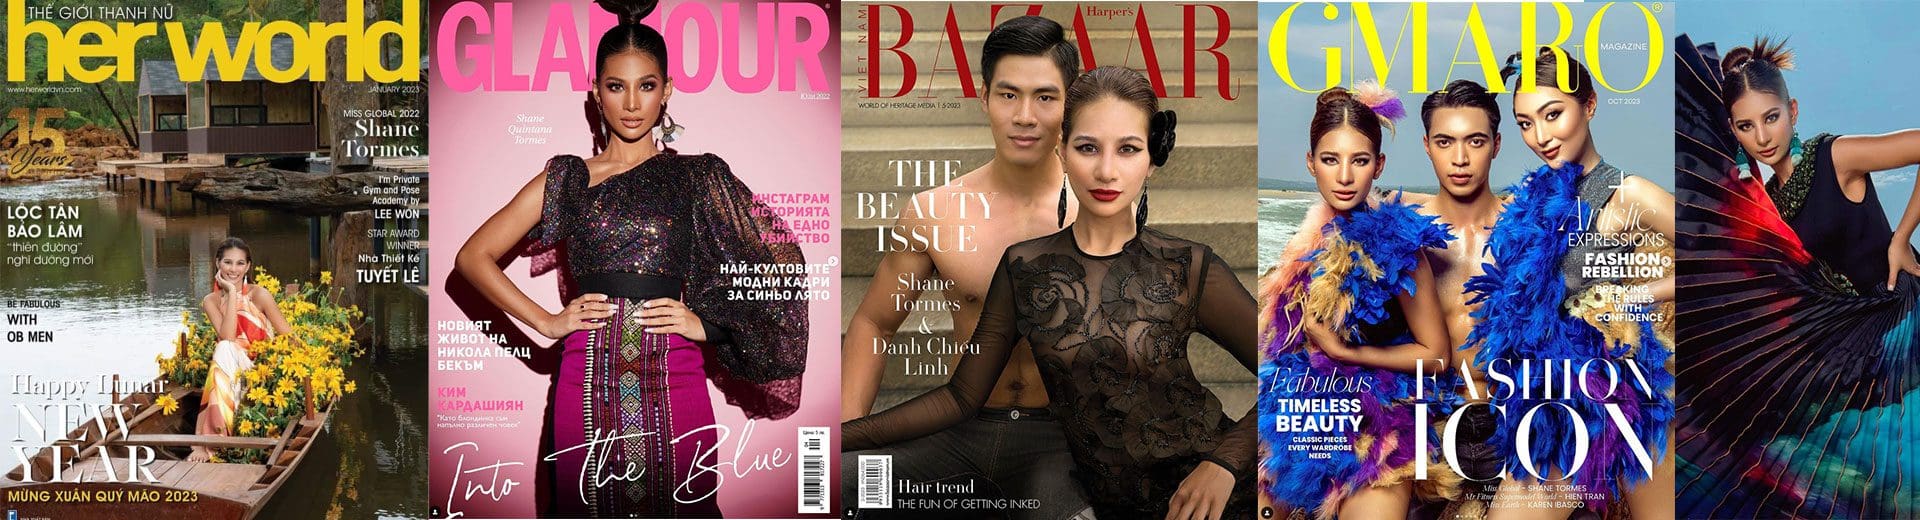 Five magazine covers featuring diverse women in fashionable outfits, accompanied by headlines highlighting beauty, fashion, and exclusive interviews.